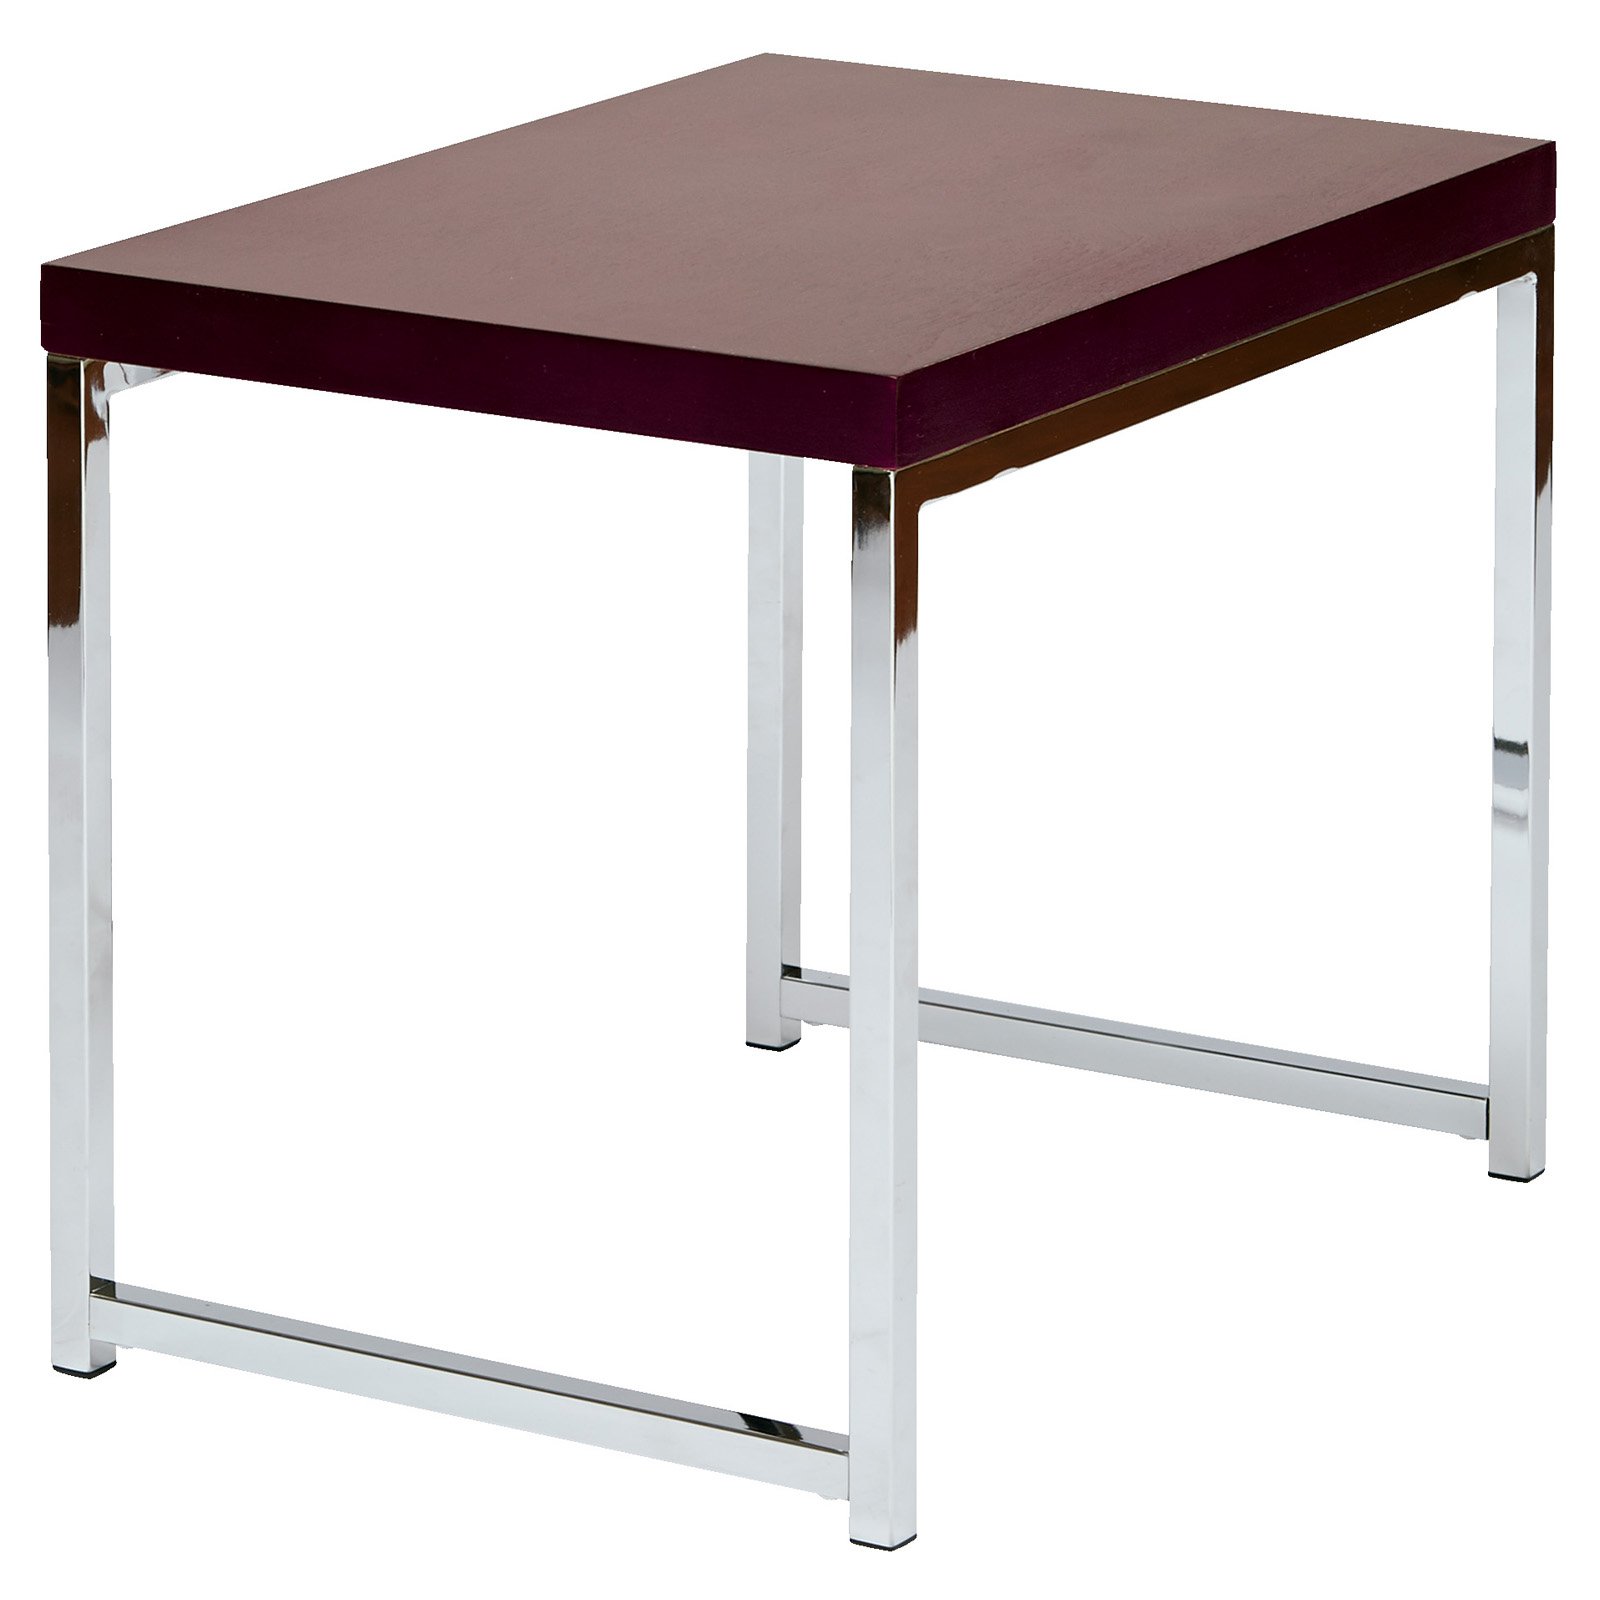 OSP Home Furnishings Wall Street End Table. Chrome/Espresso. - image 1 of 2